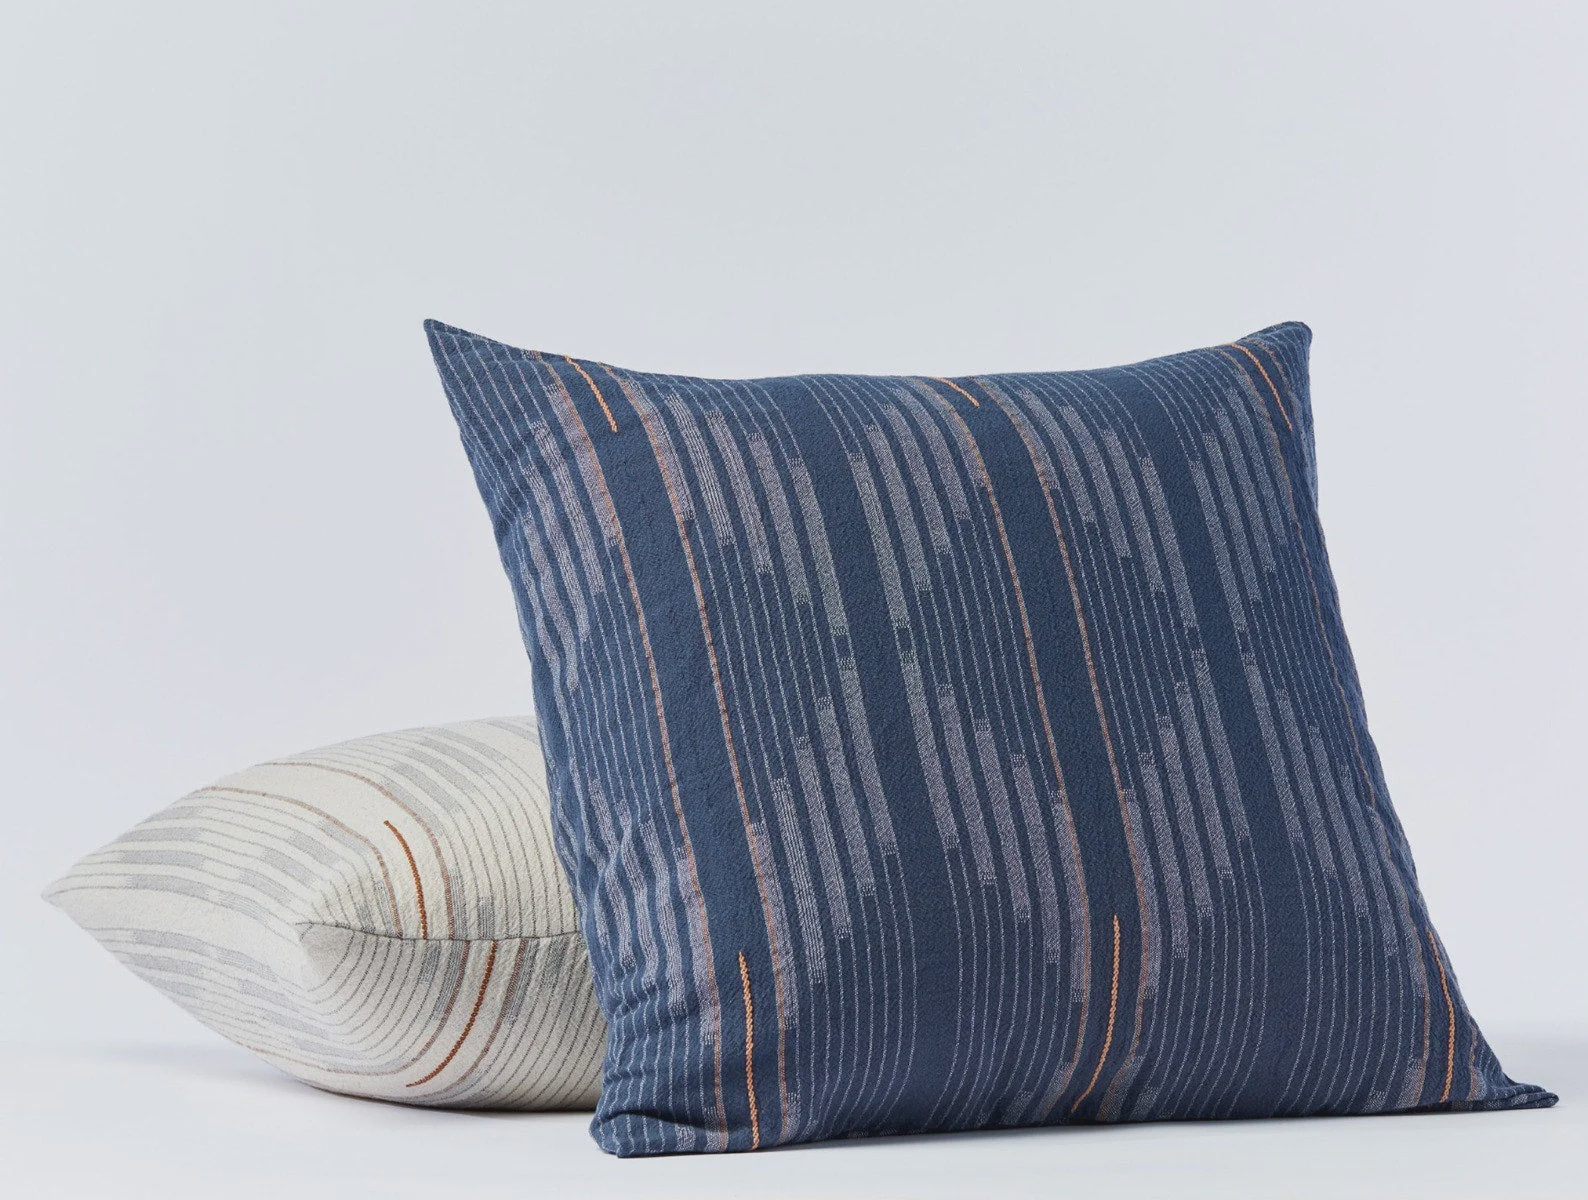 Two Morel Euro Sham Moon. Blue against a plain background; one upright with deep blue and subtle stripe design, and one leaning with a Coyuchi Inc Bungalow-style cream and multicolored curved stripe pattern.